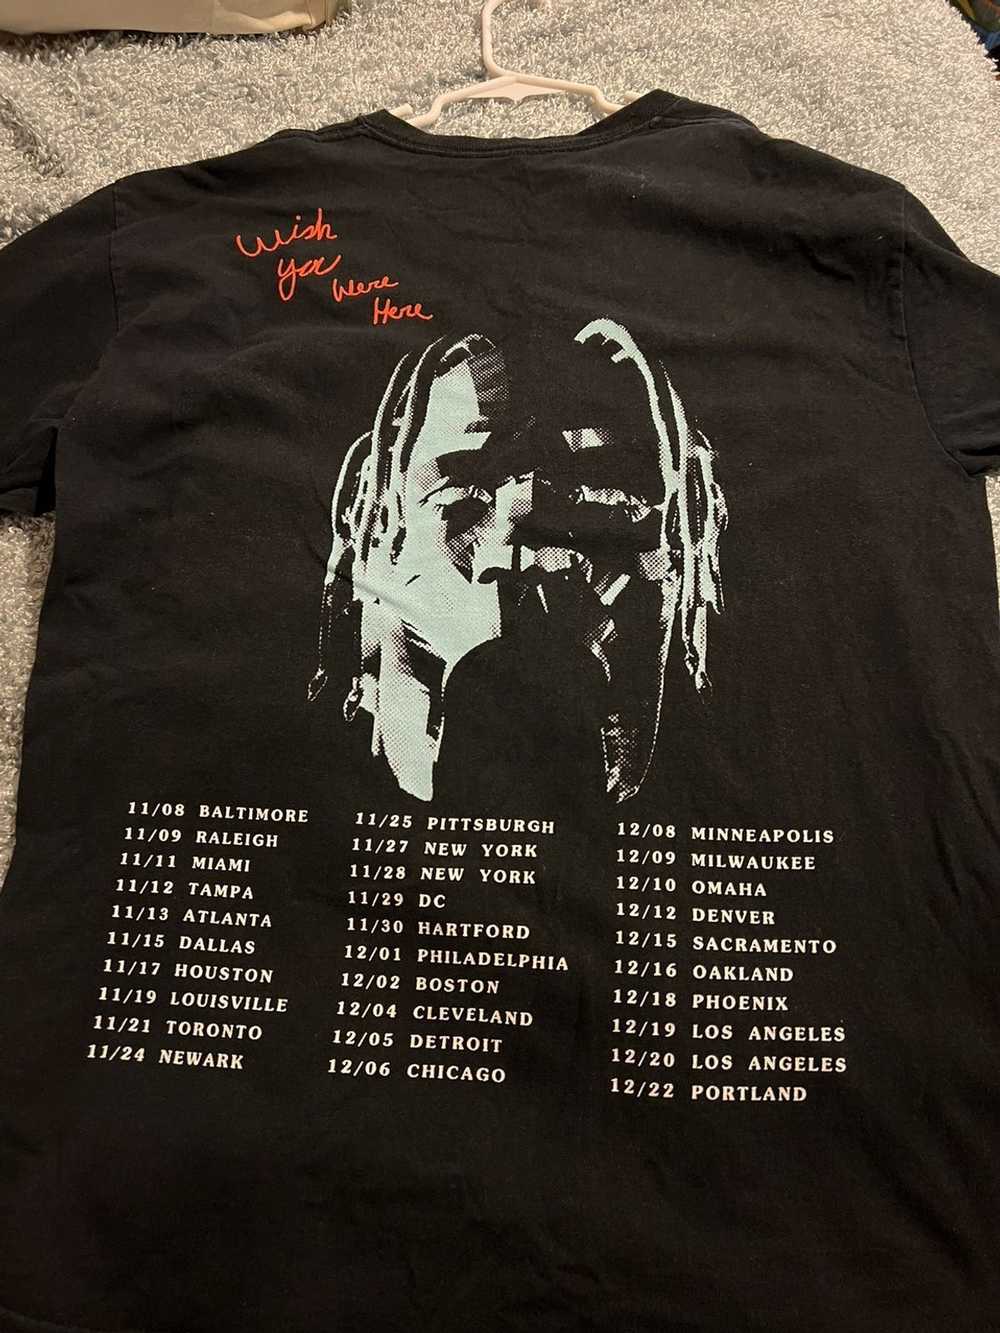 2/100 Travi$ Scott X OVO Houston Appreciation Weekend 2014 Only 100 tees  made in total..an absolute holy grail for any true collector! IG:  @_hoodtoyota_ : r/travisscott